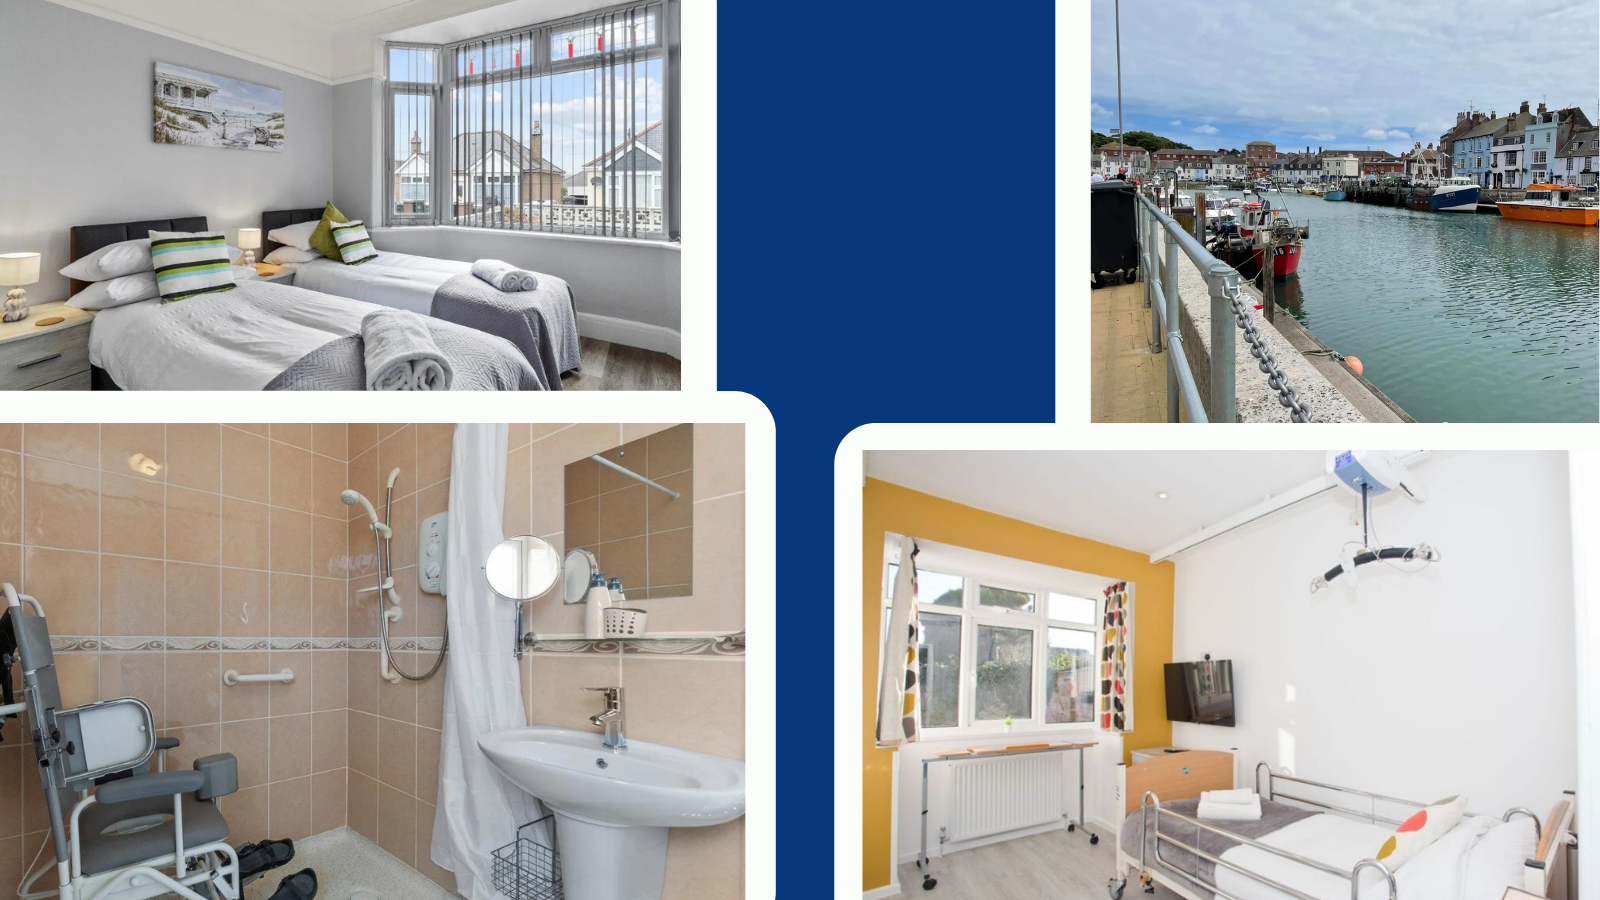 Four photos of Elevated Holiday Homes. The top left image is of a bedroom with two twin beds. The bottom left image is of an accessible bathroom, with a fully accessible shower. The top right image is of Weymouth Harbour. The bottom right image is of a bedroom with a hoist and profiling bed. 